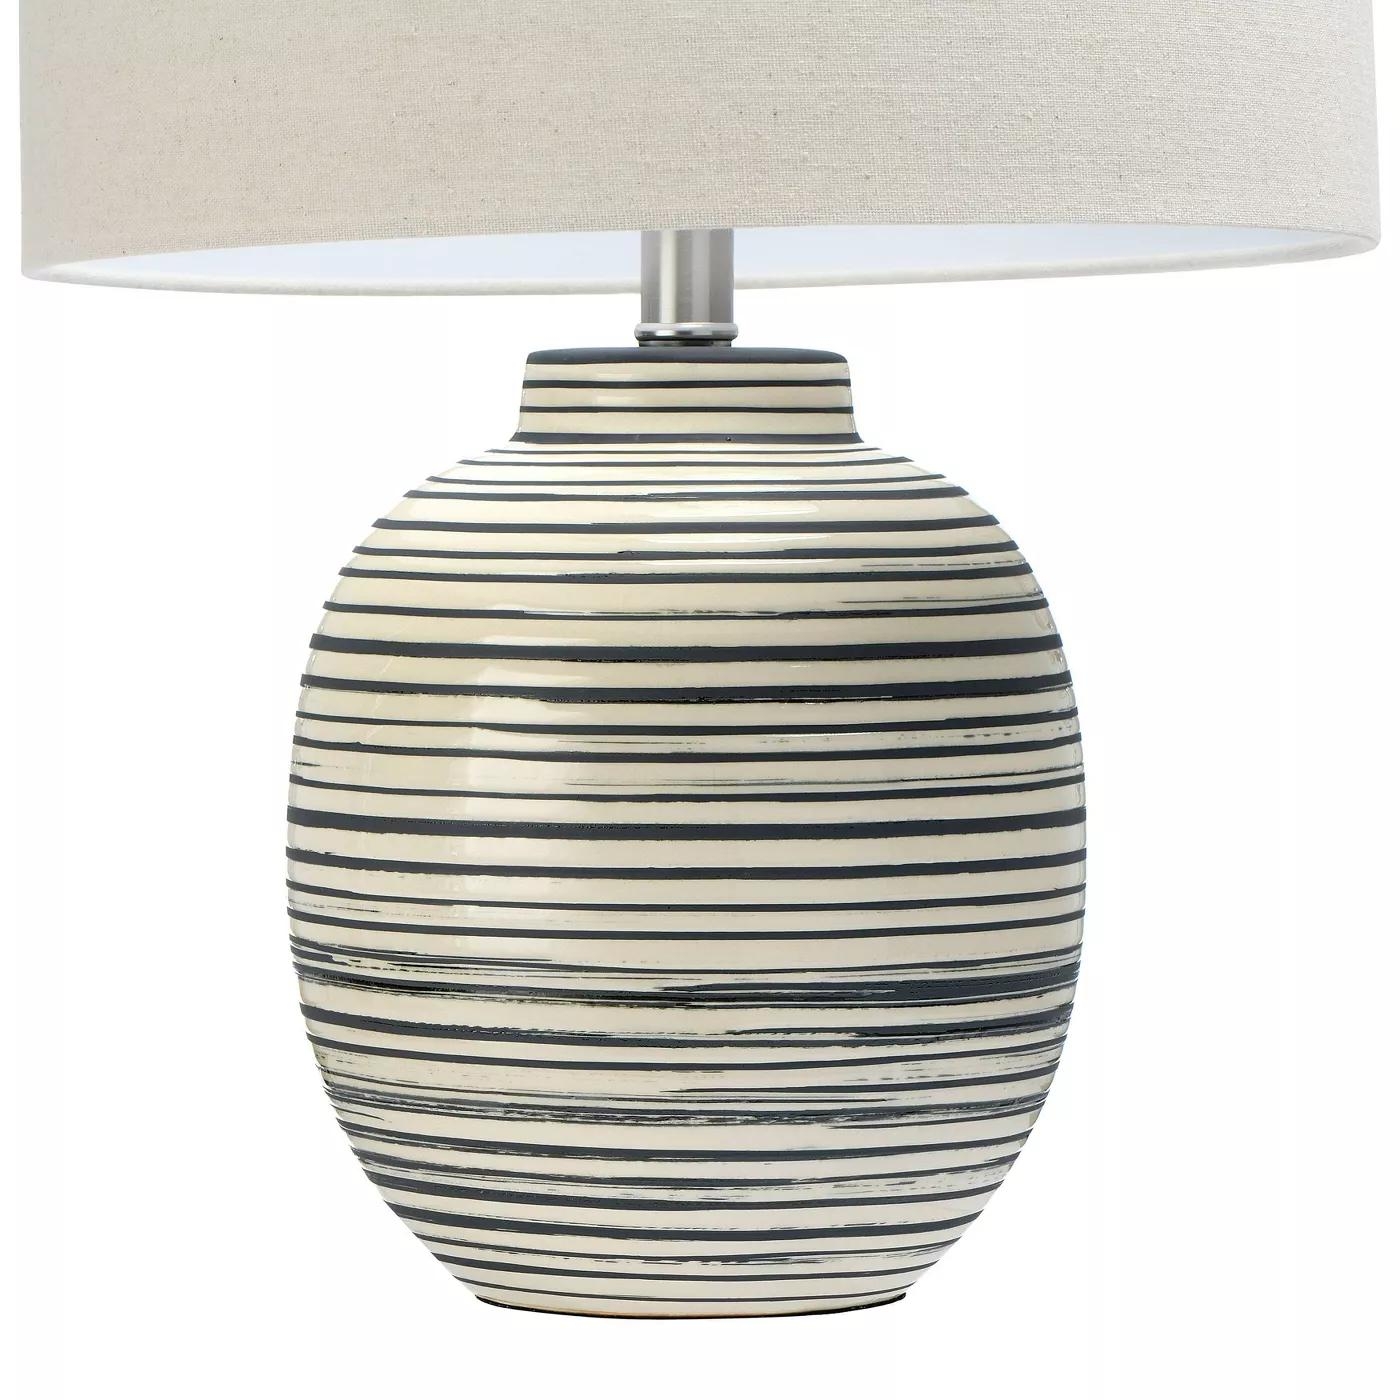 23" Ceramic Textured Striped Table Lamp - Image 2